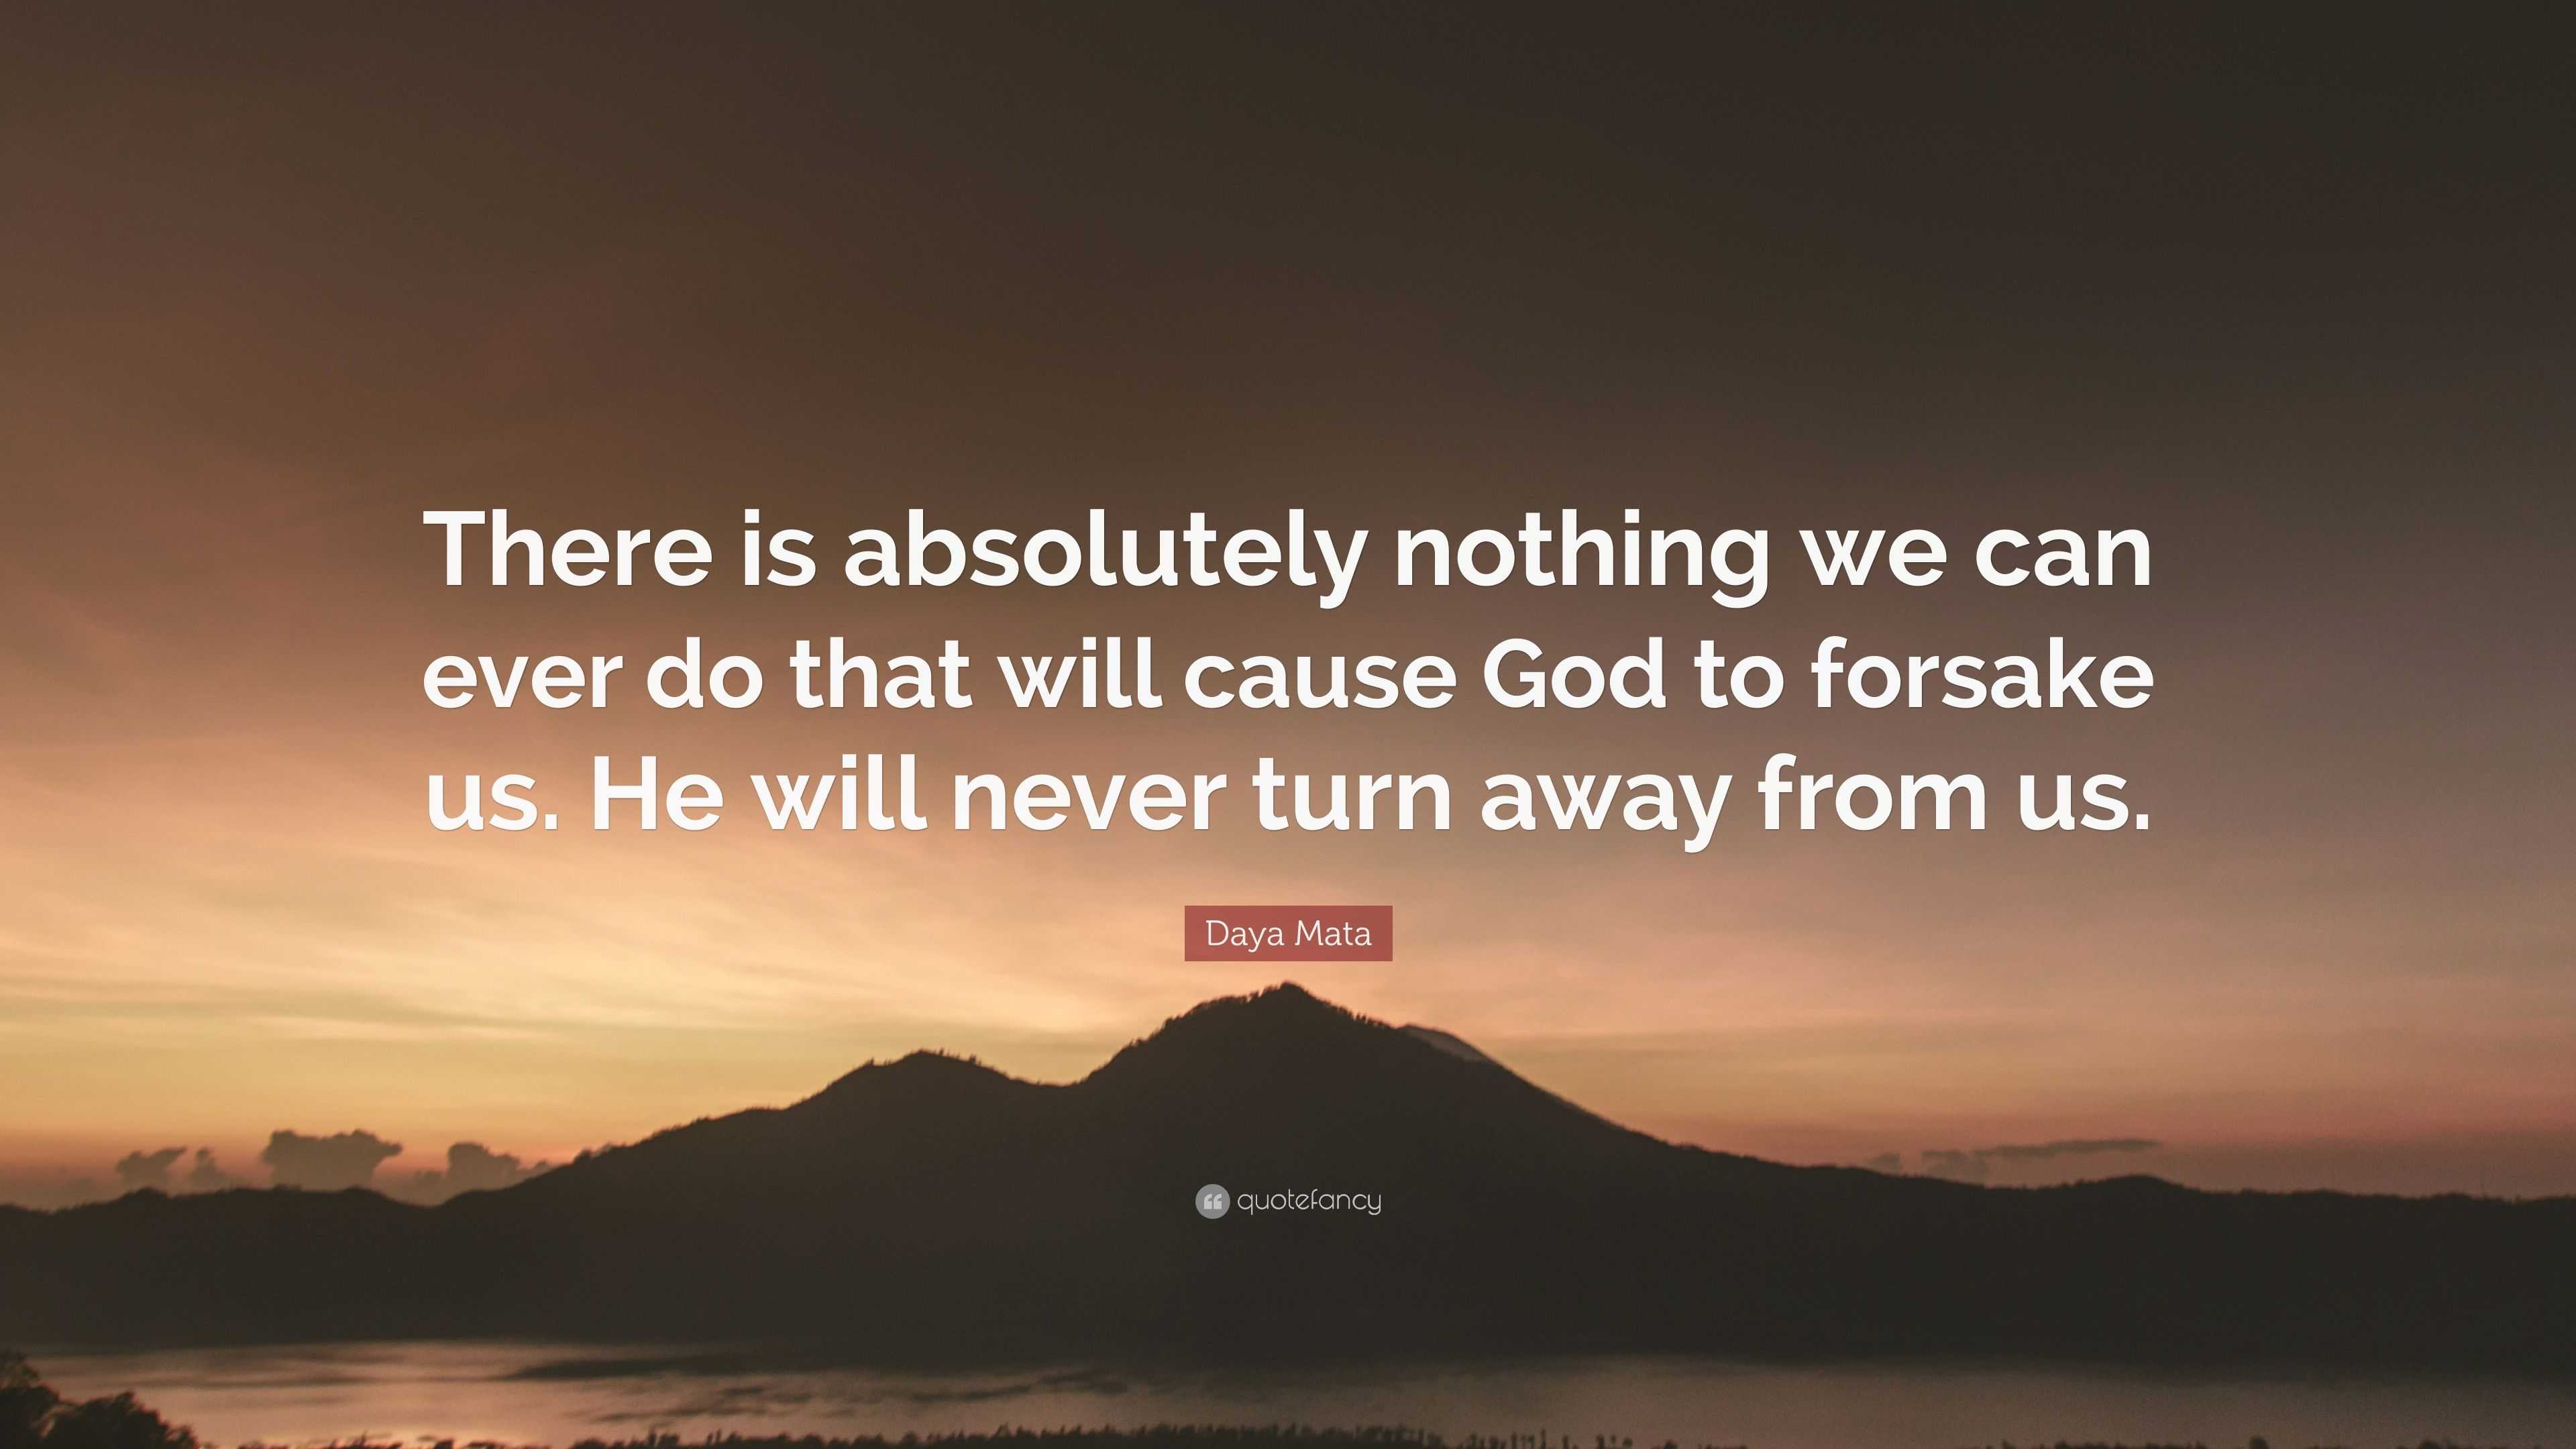 Daya Mata Quote: “There is absolutely nothing we can ever do that will ...